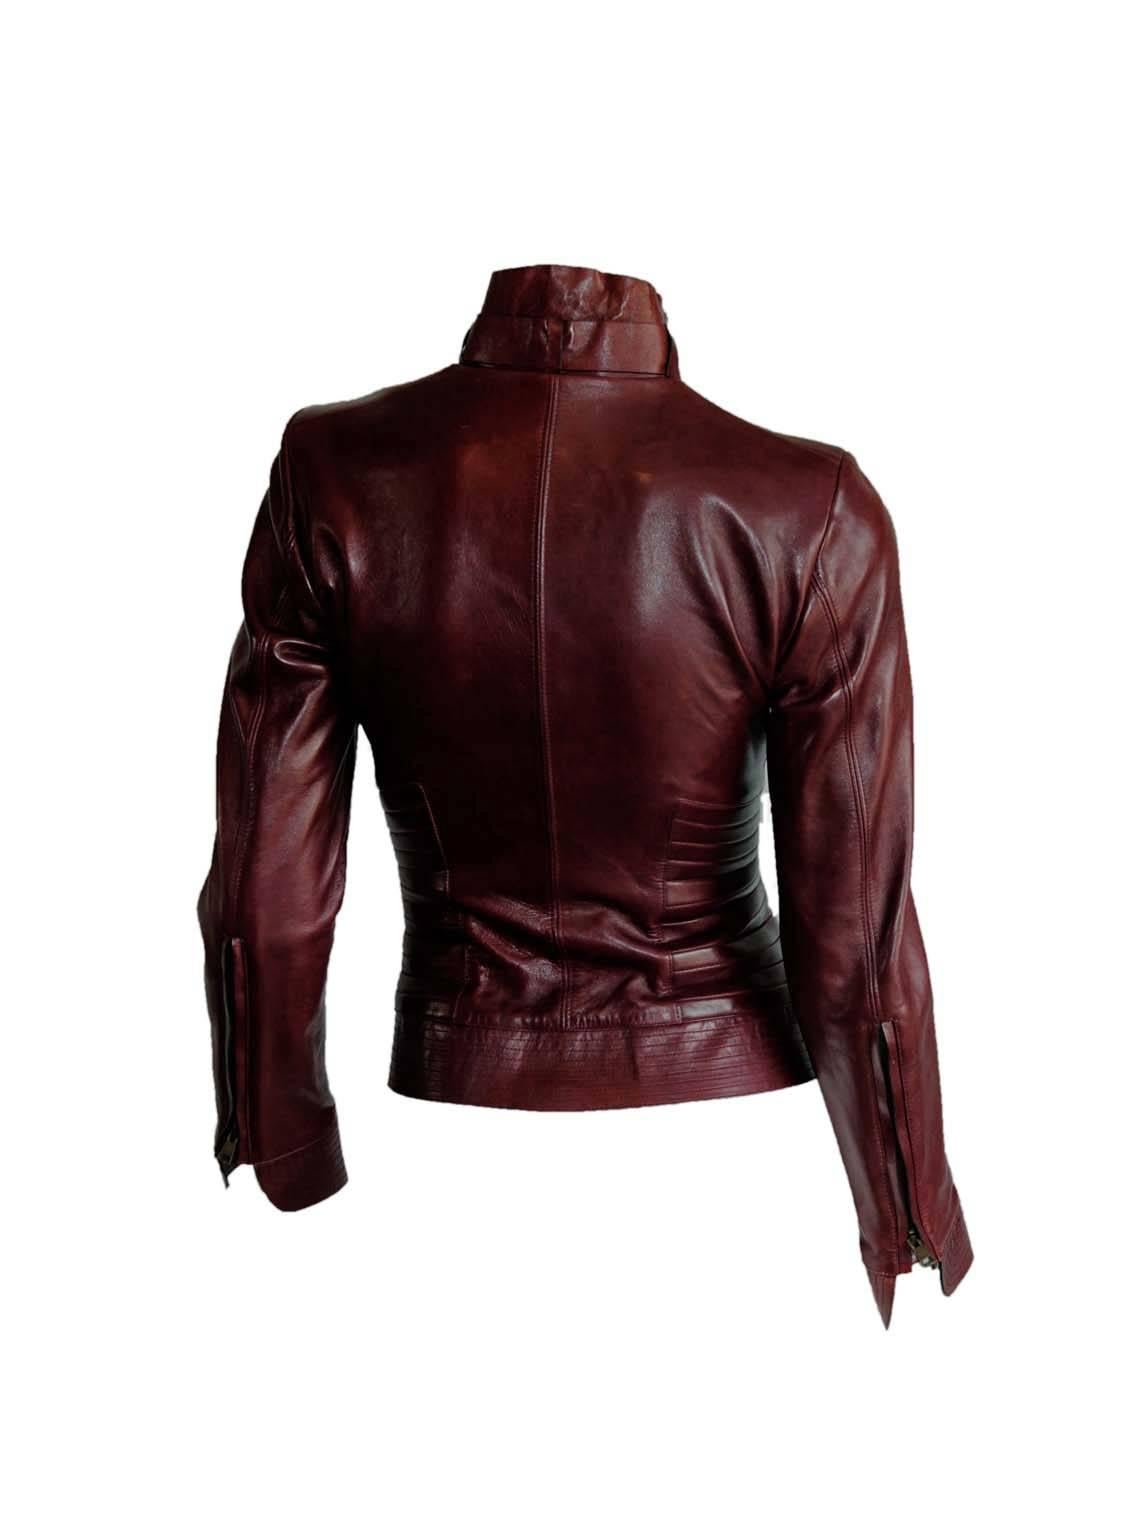  The Dreamiest Tom Ford For Gucci Fall Winter 2003 Maroon Red Leather Corseted Moto Jacket!

Considered by many to be his greatest collection of all, Tom Ford's fall winter 2003 collection for Gucci was simply awash with the most heavenly corseted